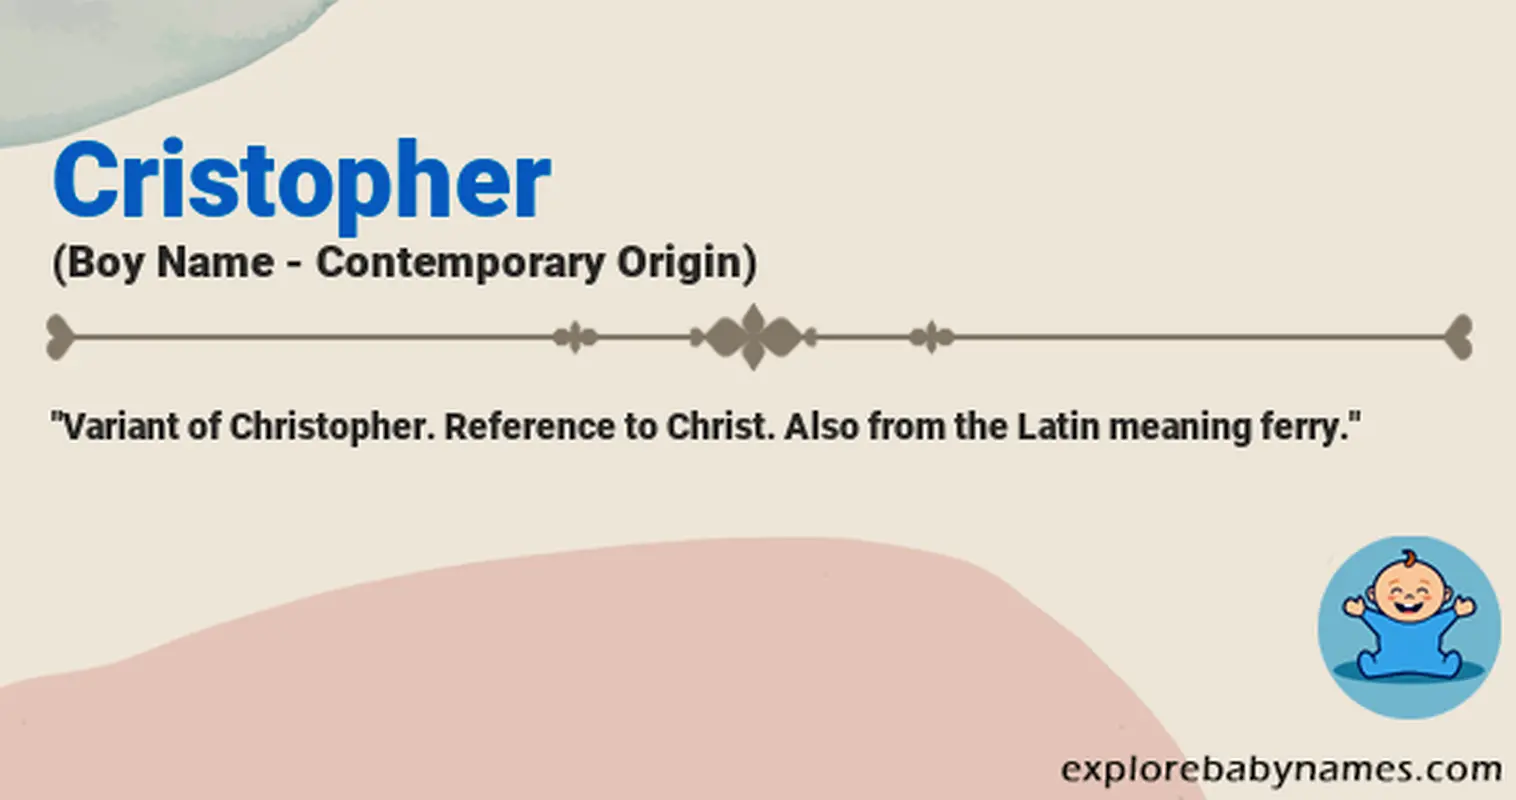 Meaning of Cristopher